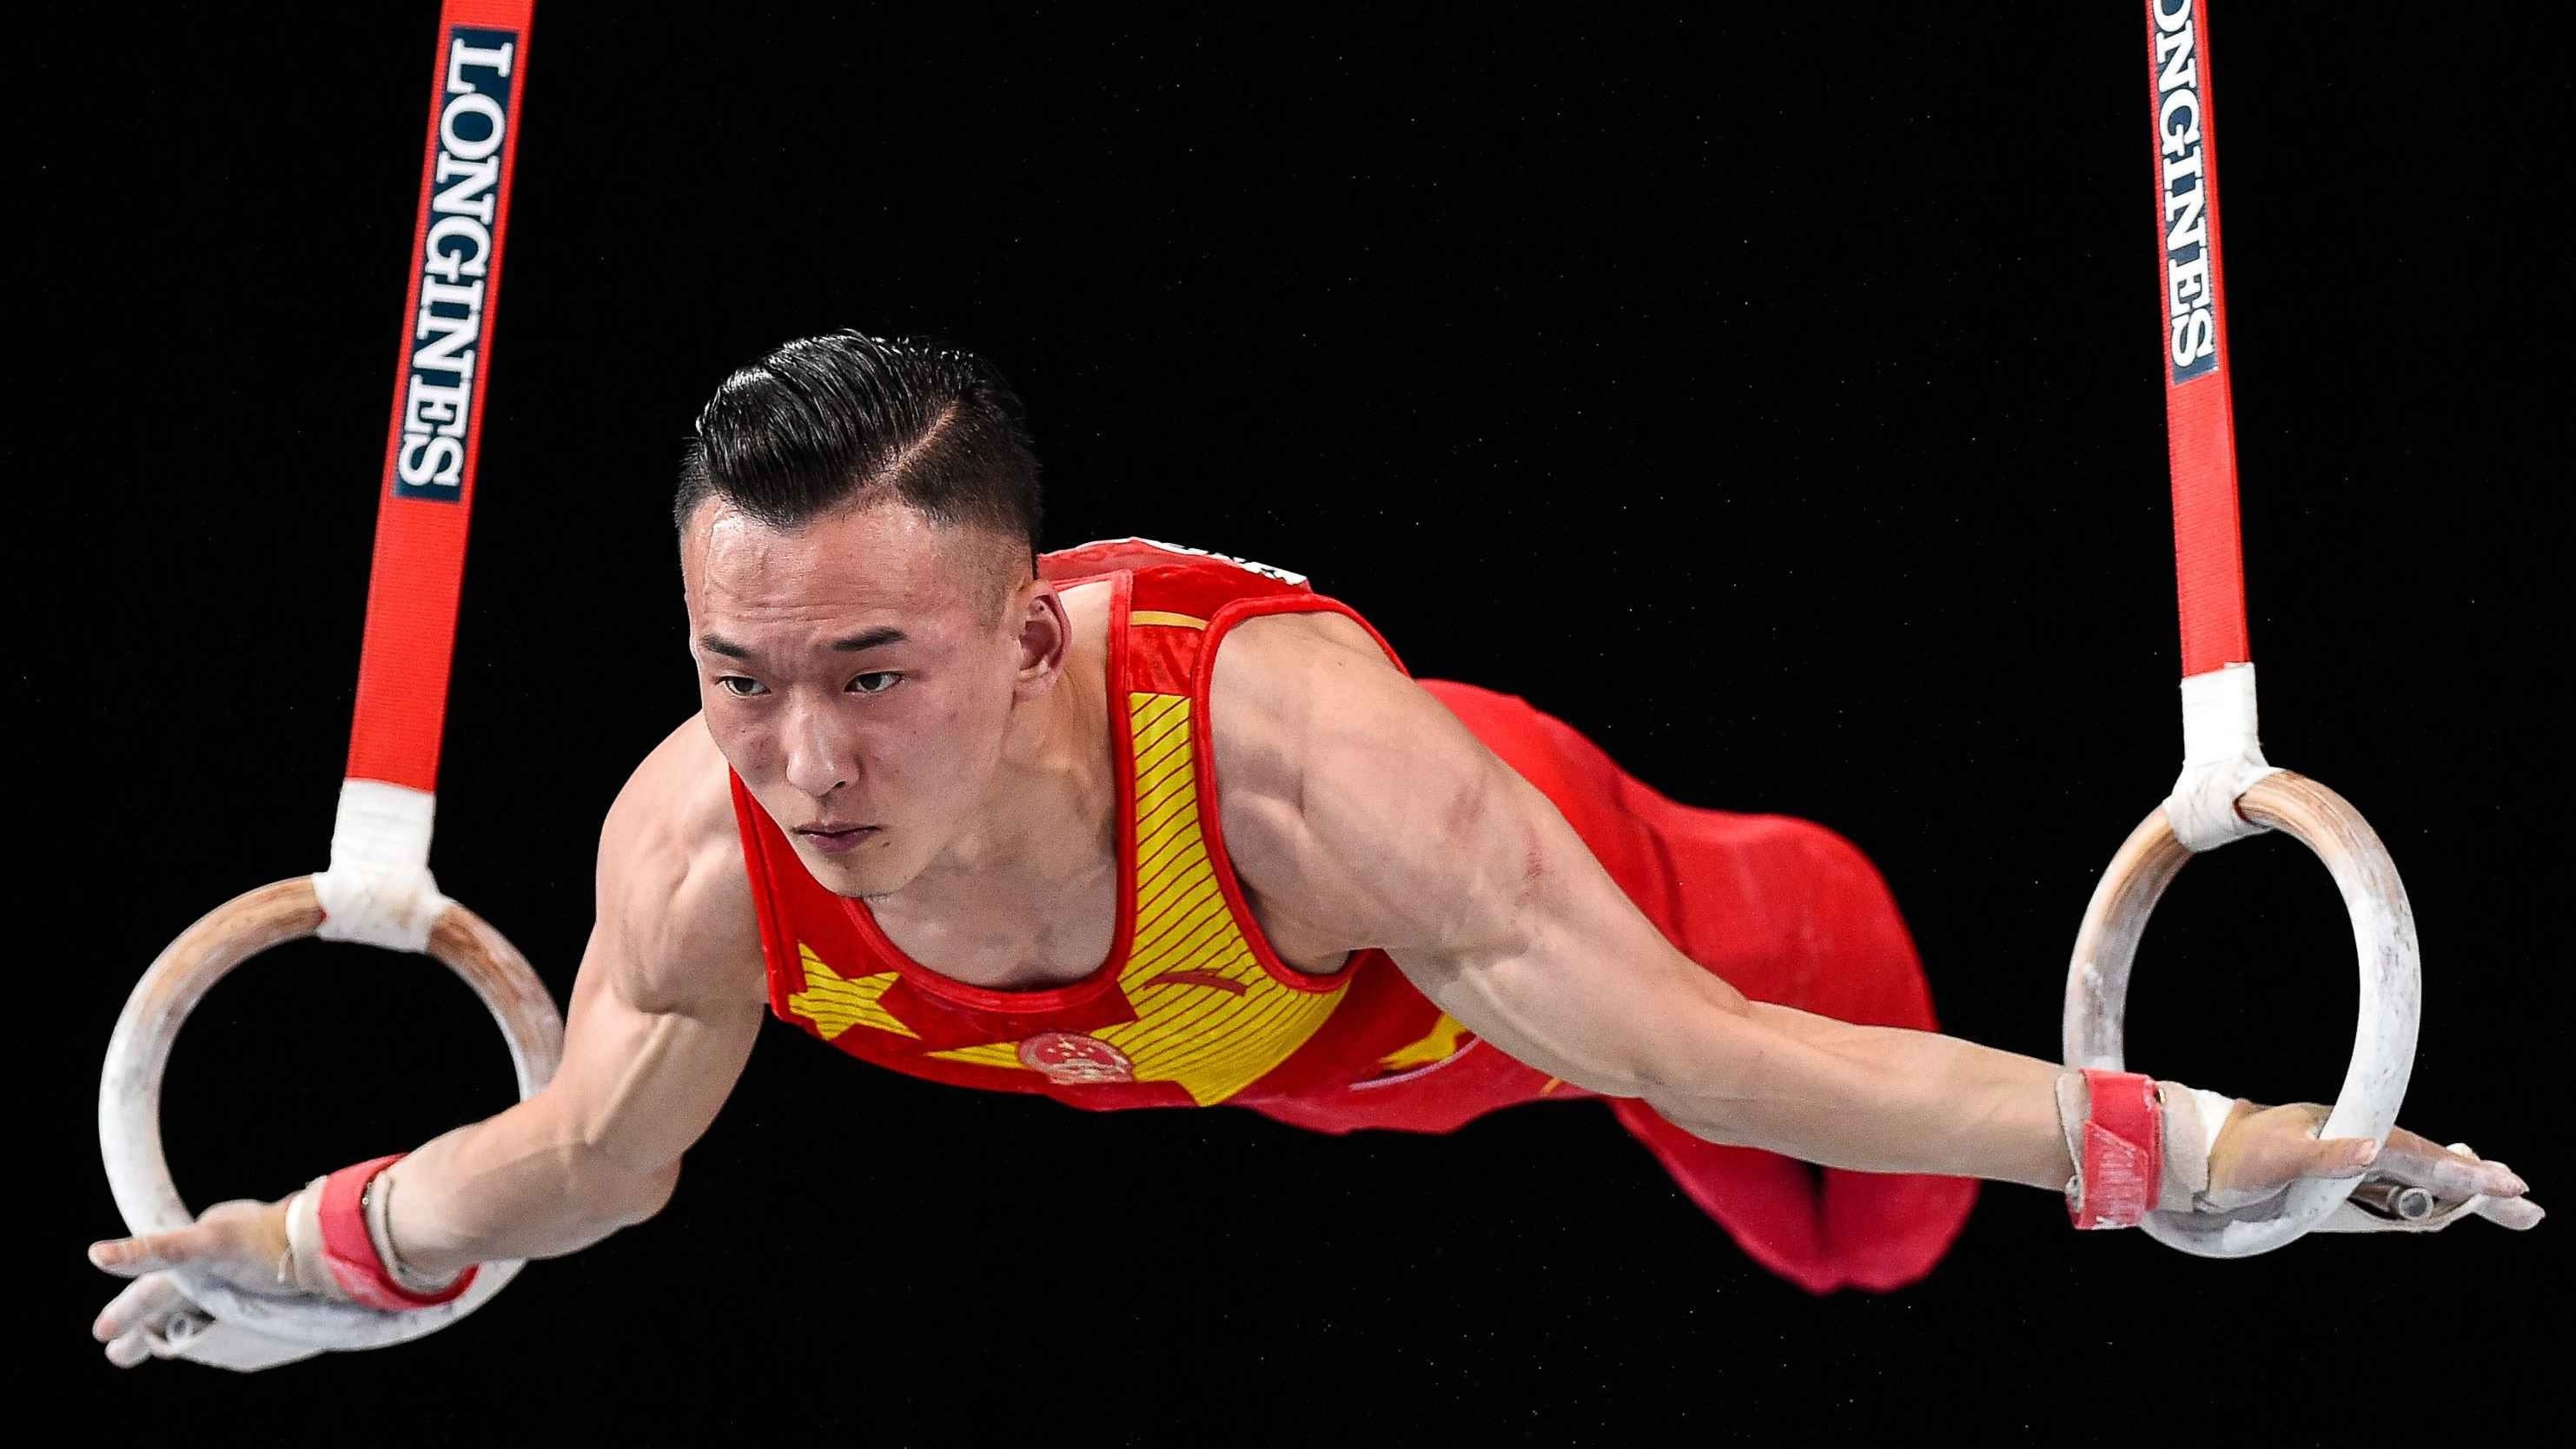 Rings (Gymnastics): Chinese national team, Gymnastics World Championship, Xiao Ruoteng, 2021, Men's gold and silver medals. 2970x1670 HD Background.